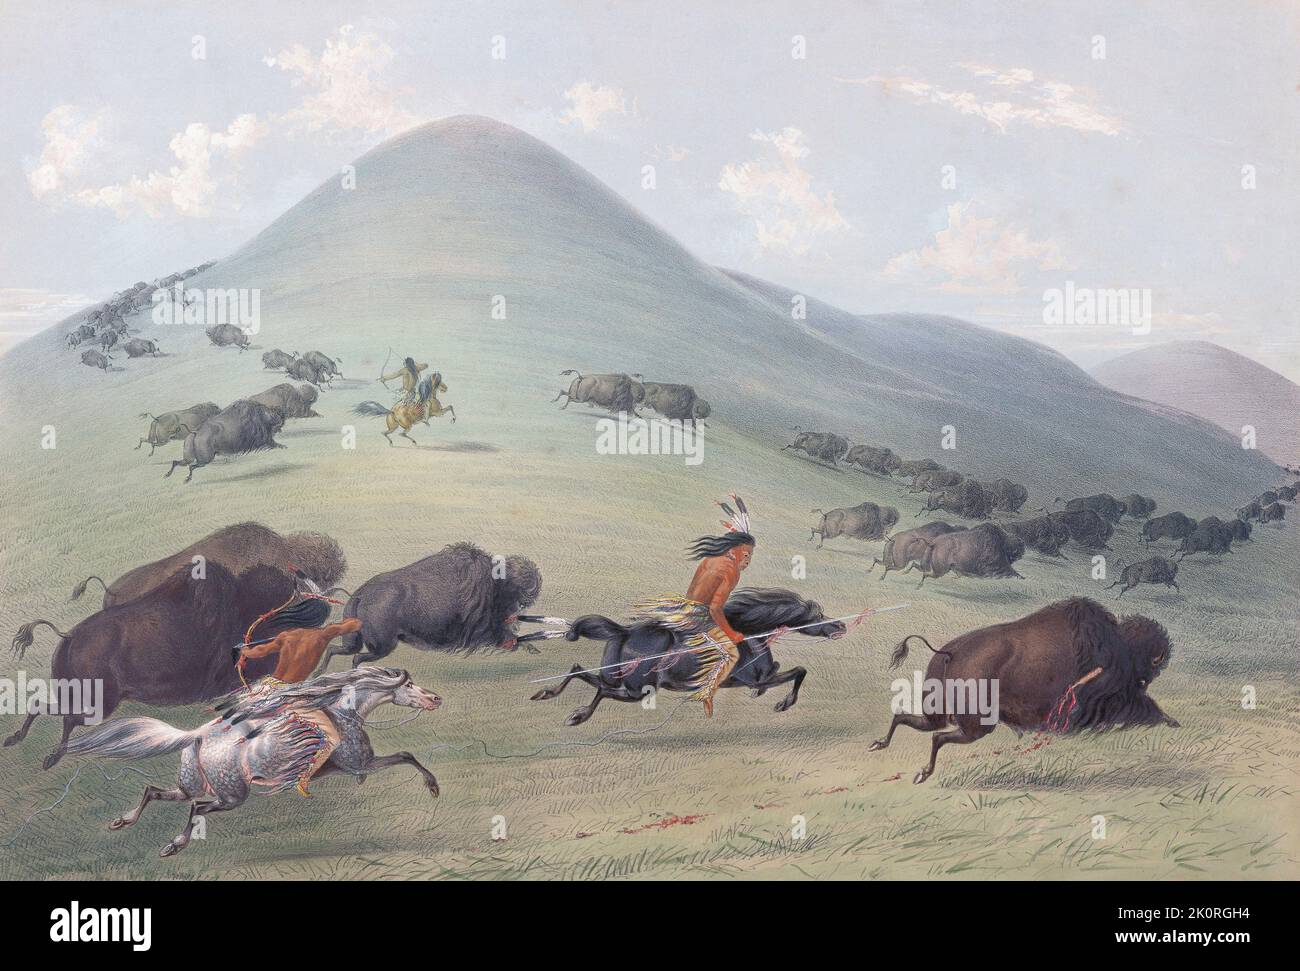 Plains Indians on horseback hunt buffalo with spears and bows and arrows.  American bison, B. bison.  From Catlin's North American Indian Portfolio, published in London 1844 by the artist, American adventurer George Catlin, 1796 - 1872.  During many journeys Catlin recorded with pen and brush the customs and life-styles of Native American tribes. Stock Photo